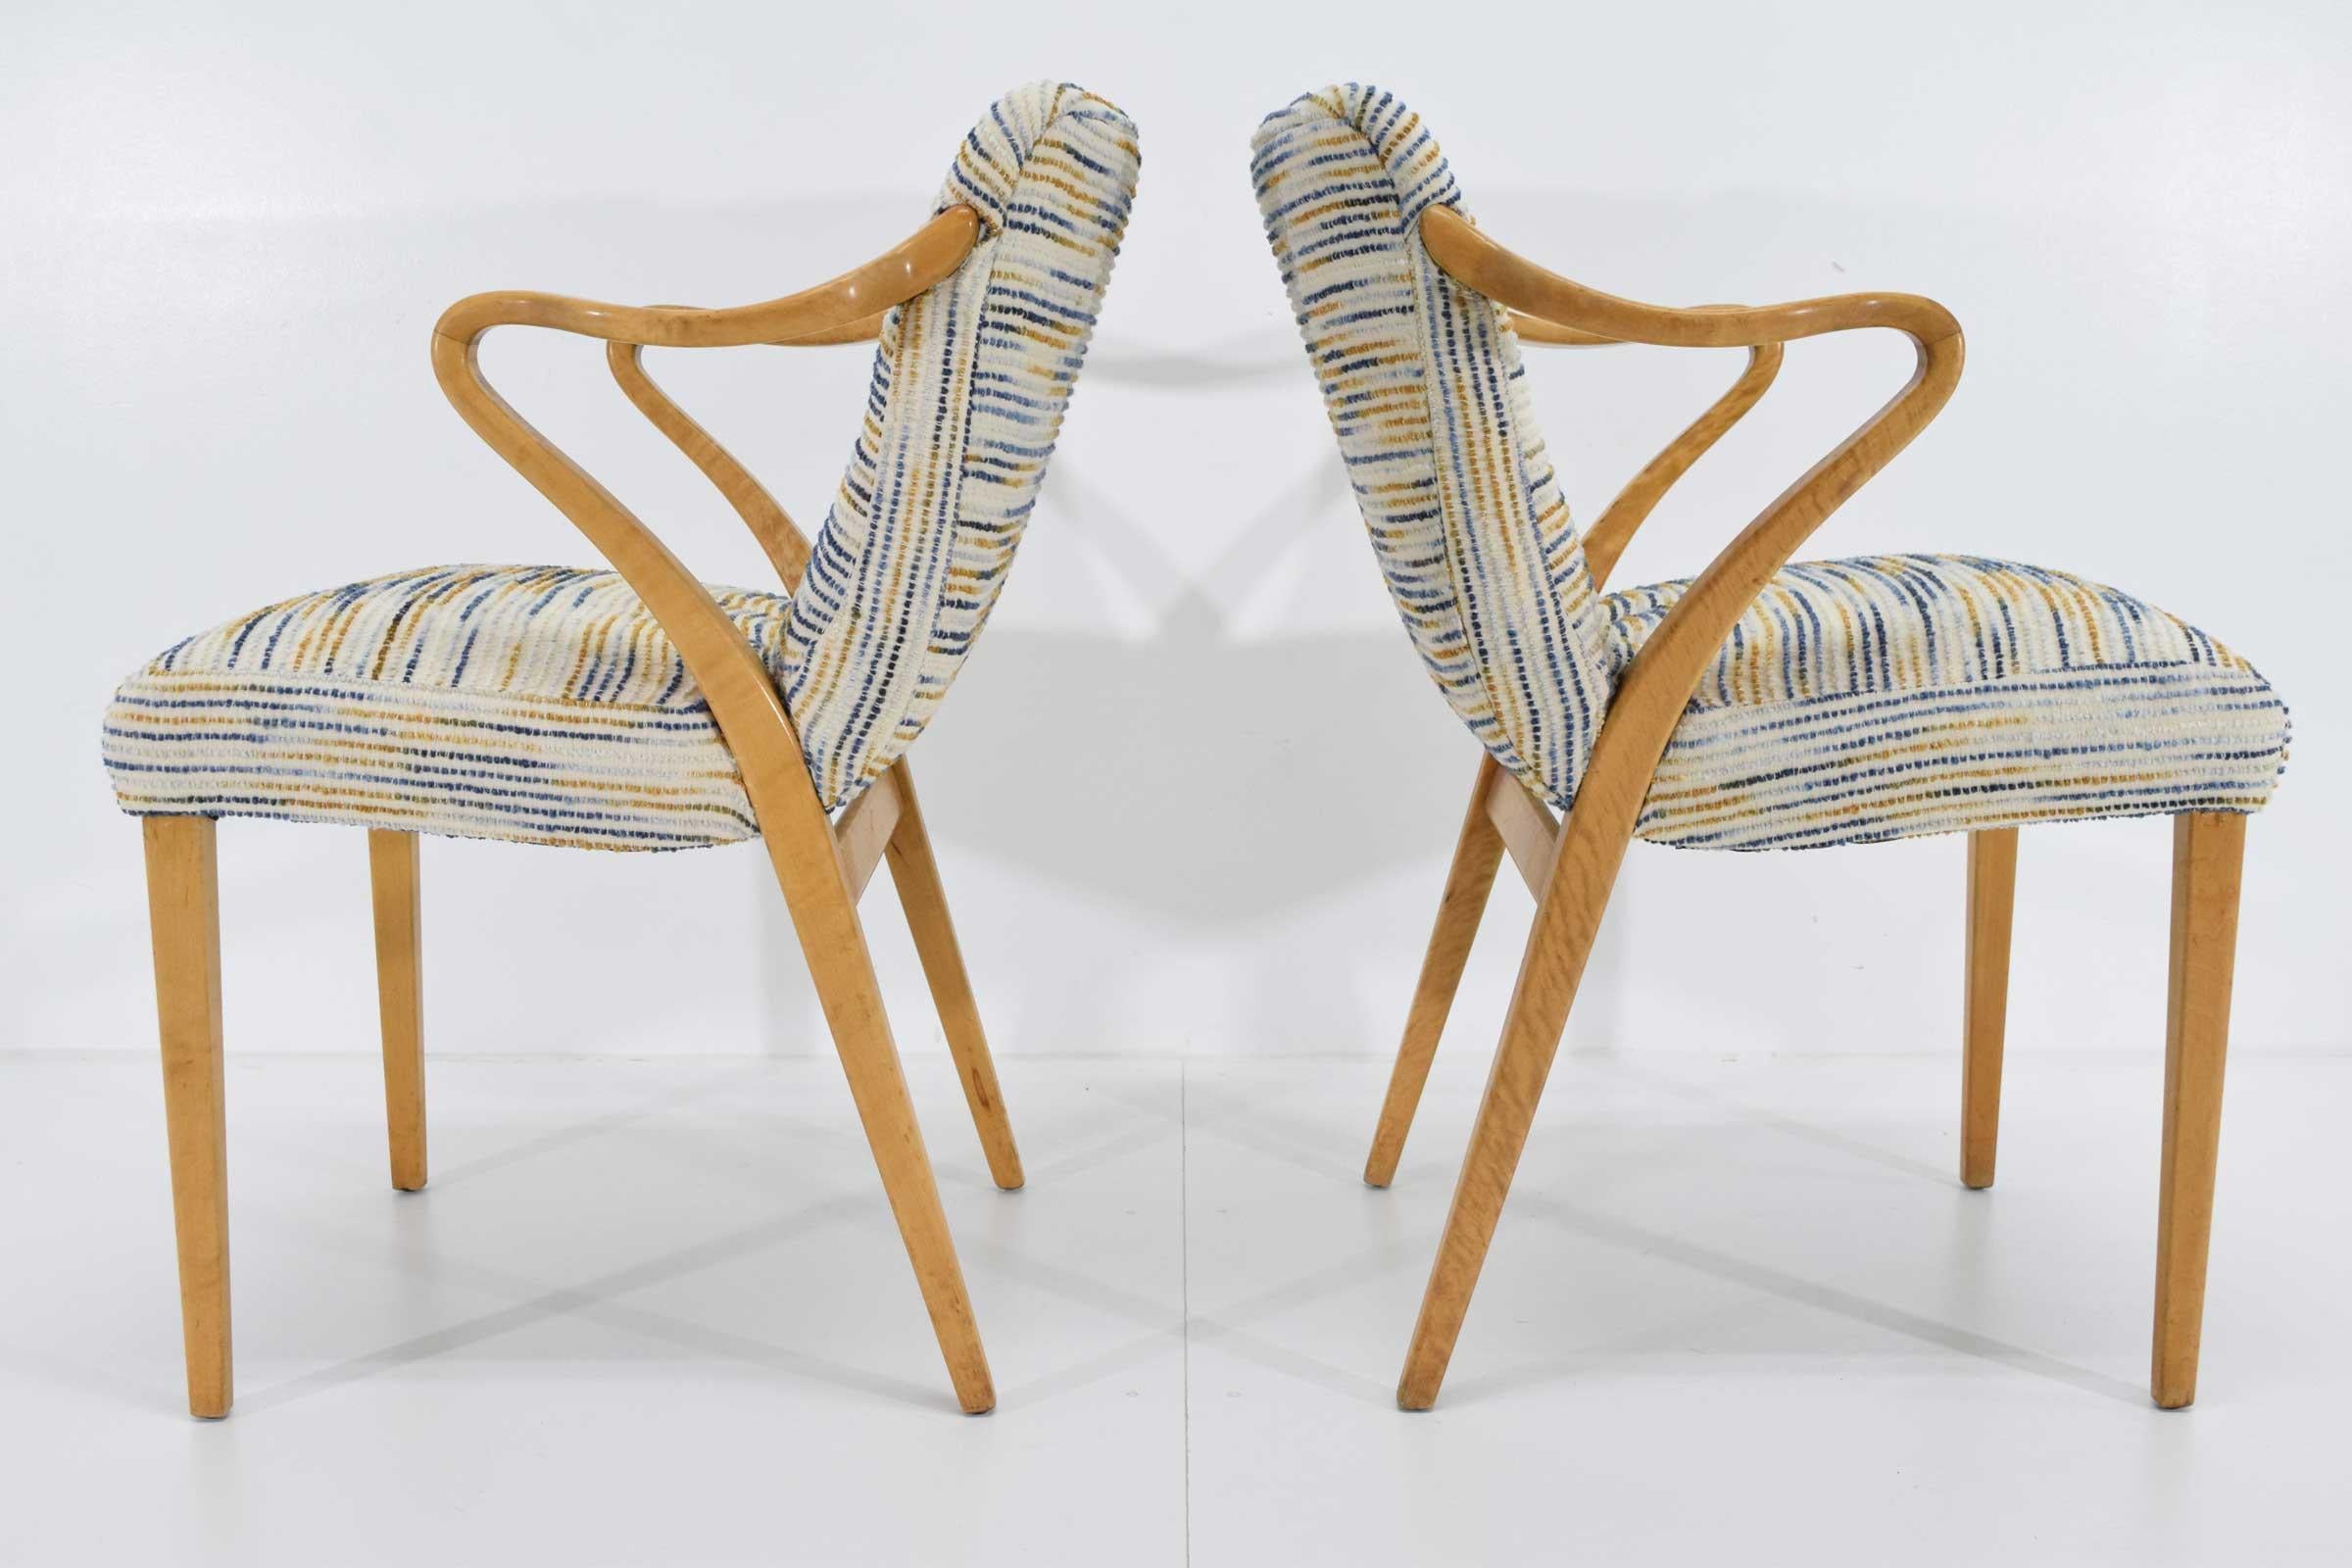 A pair of tiger eye birch model 1522 armchairs with wonderfully curved armrests by Axel Larsson for Svenska Möbelfabrikerna, Bodafors. This model was designed in 1936. We have reupholstered in a bouclé Pollack fabric with blues, gold, nutmeg that